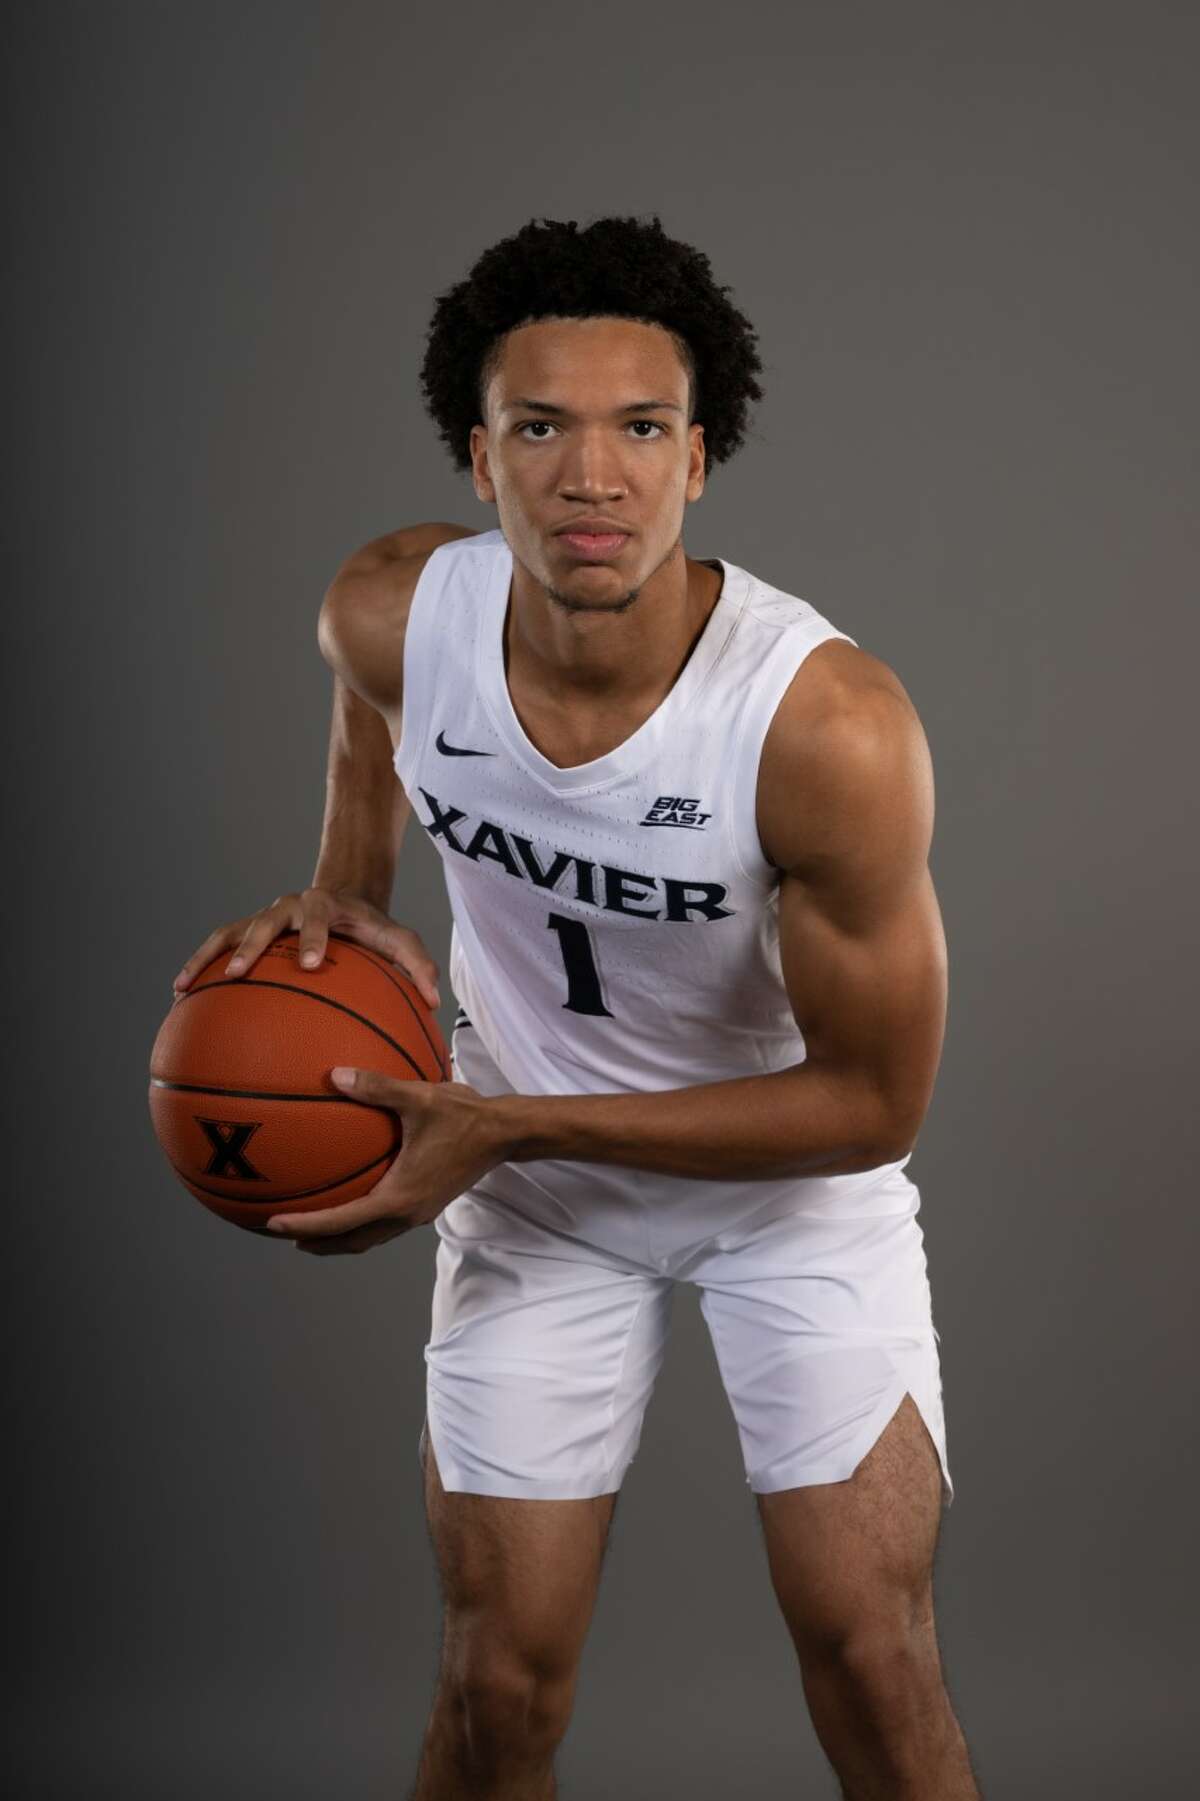 New Haven's Desmond Claude is fighting for the starting point guard spot at Xavier as a freshman this season.